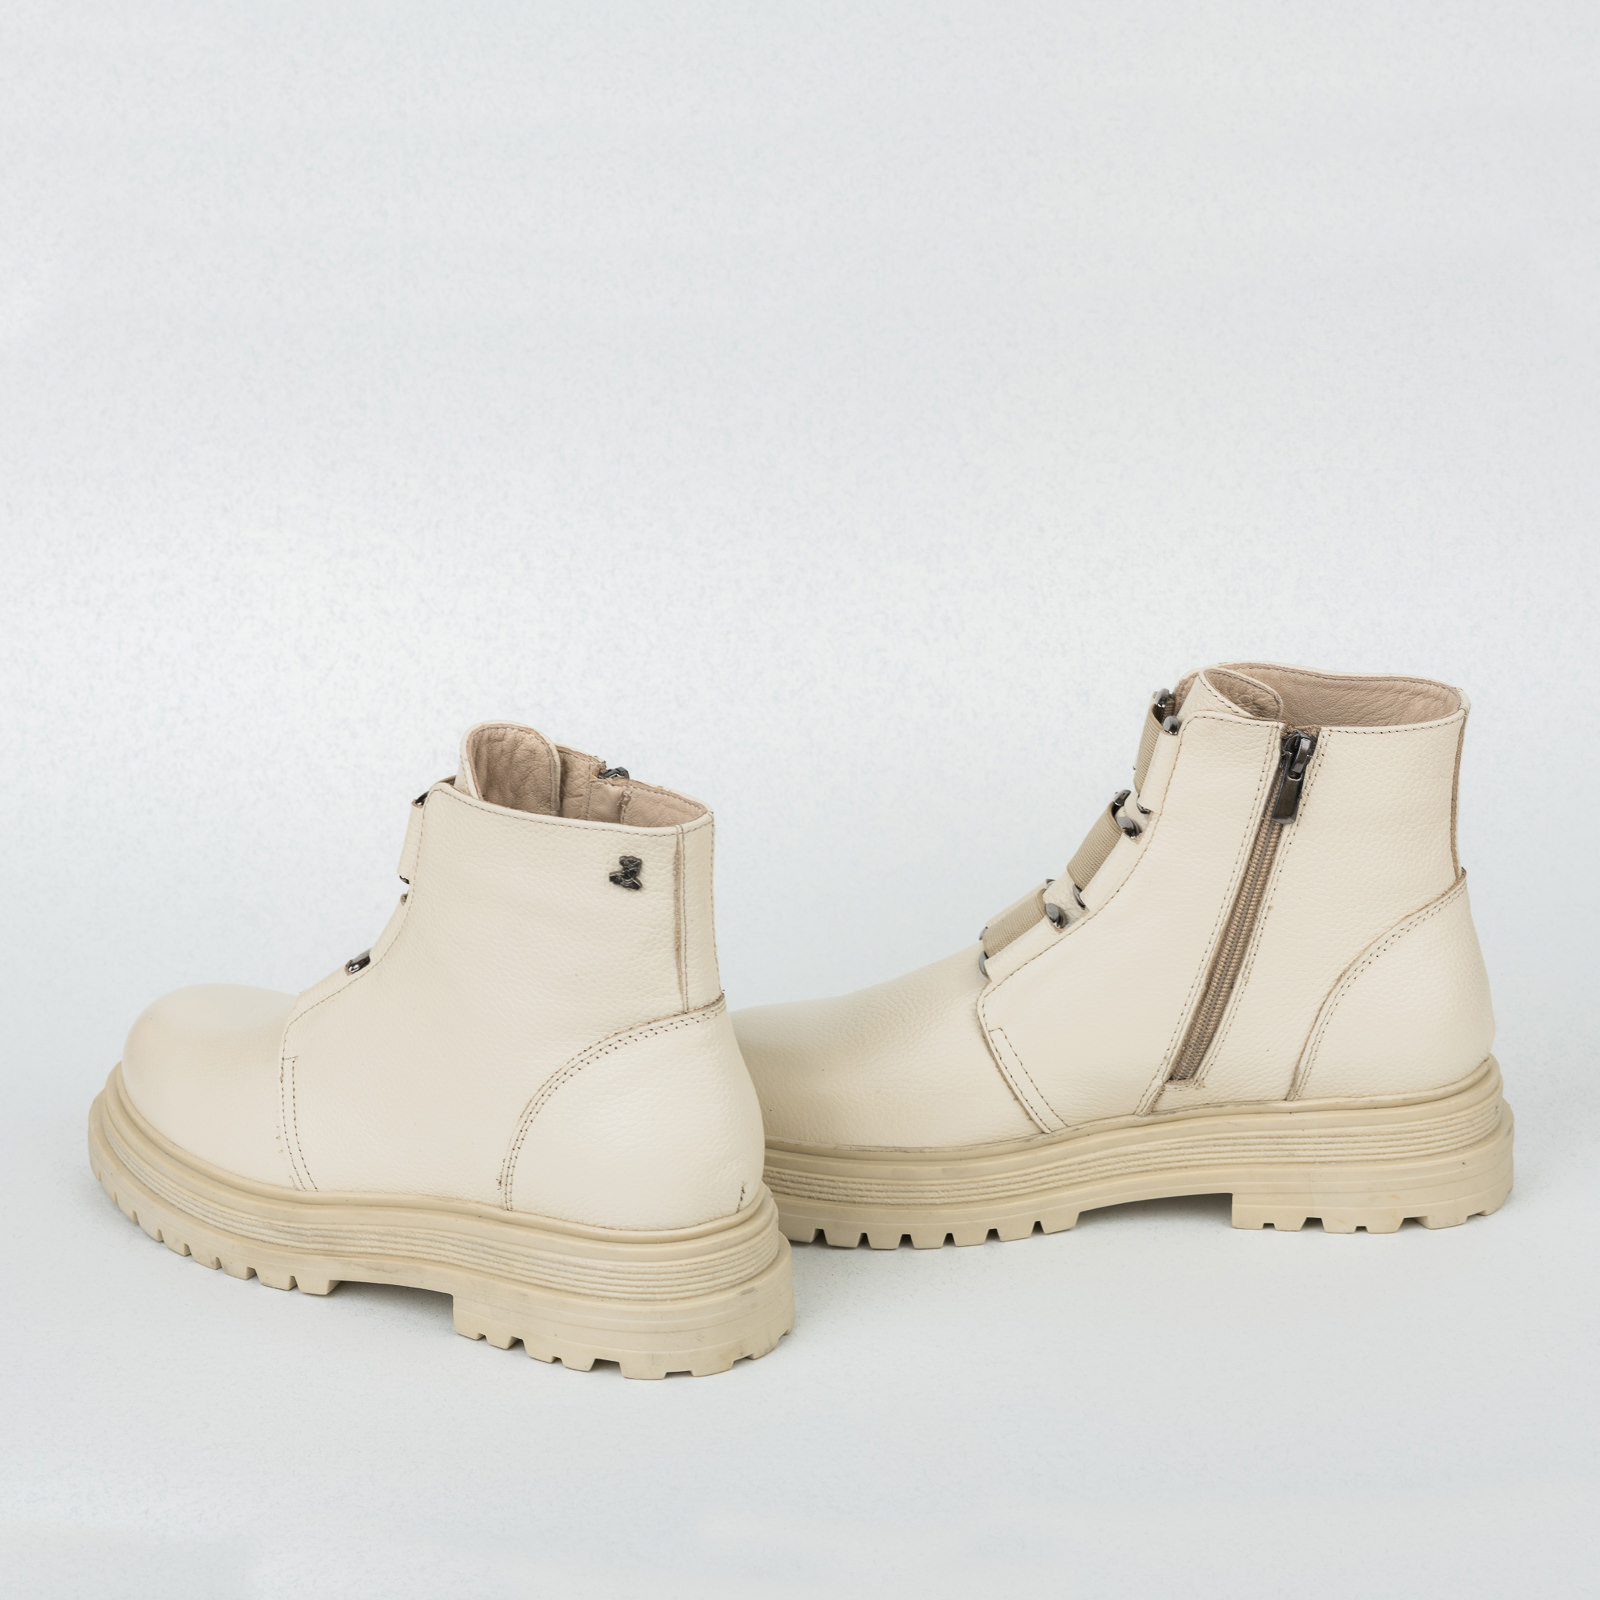 Leather ankle boots B441 - BEIGE